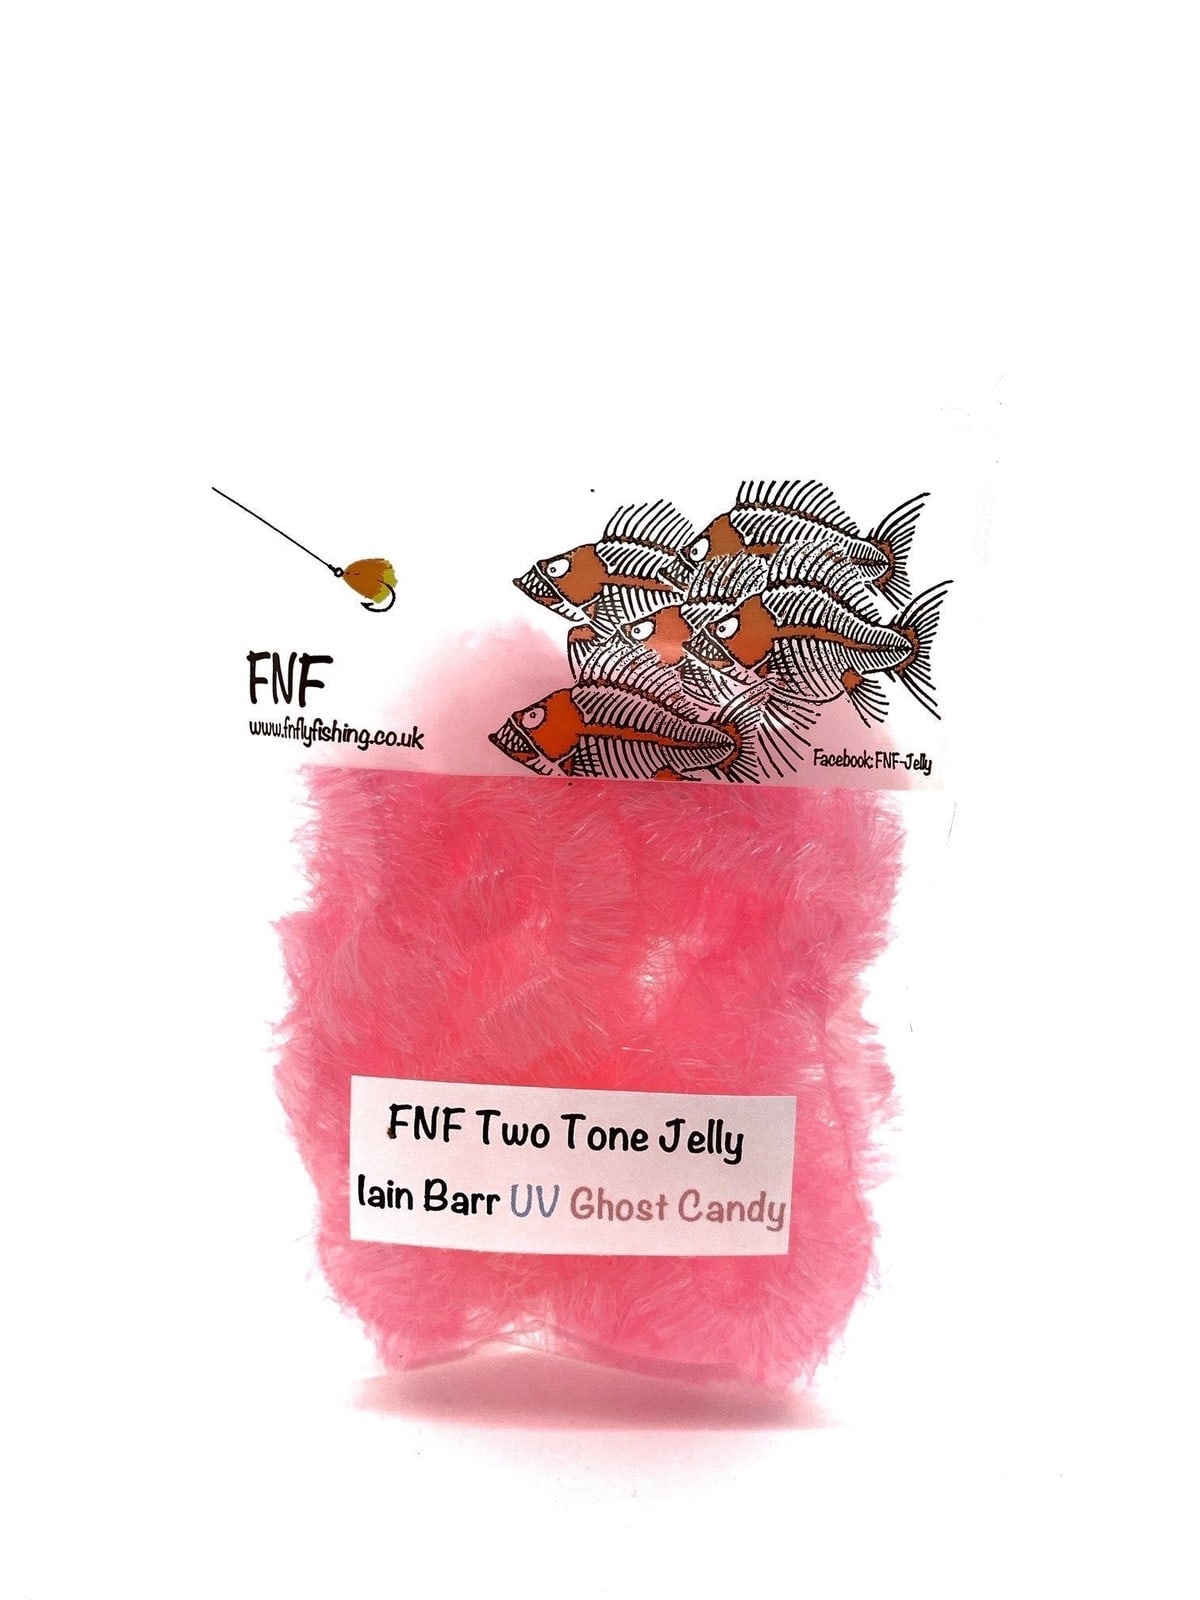 FNF Two Toned Jelly